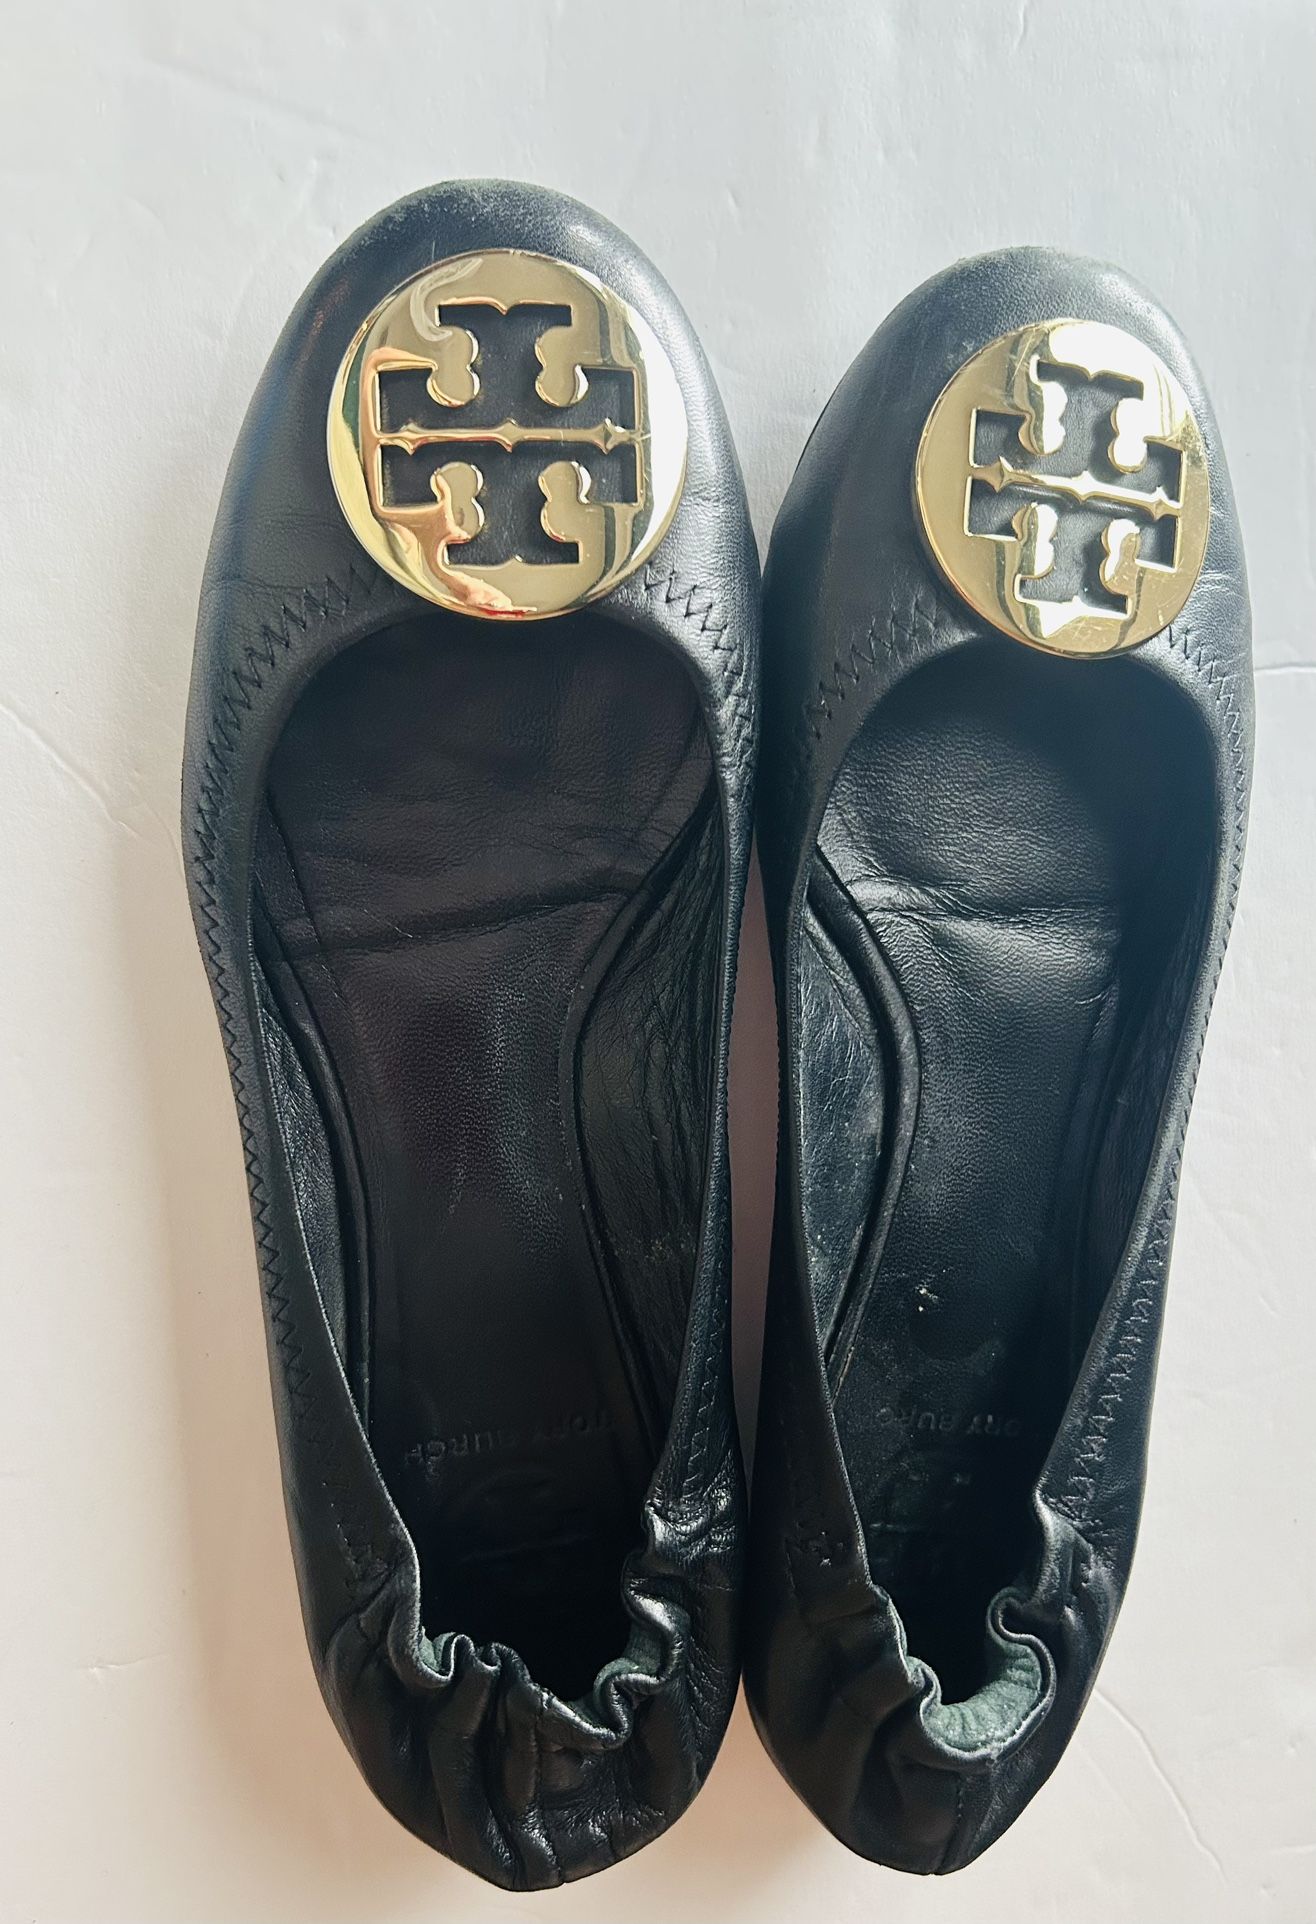 Tory Burch Minnie Blue Leather Travel Ballet Flats Shoes Womens Size 9